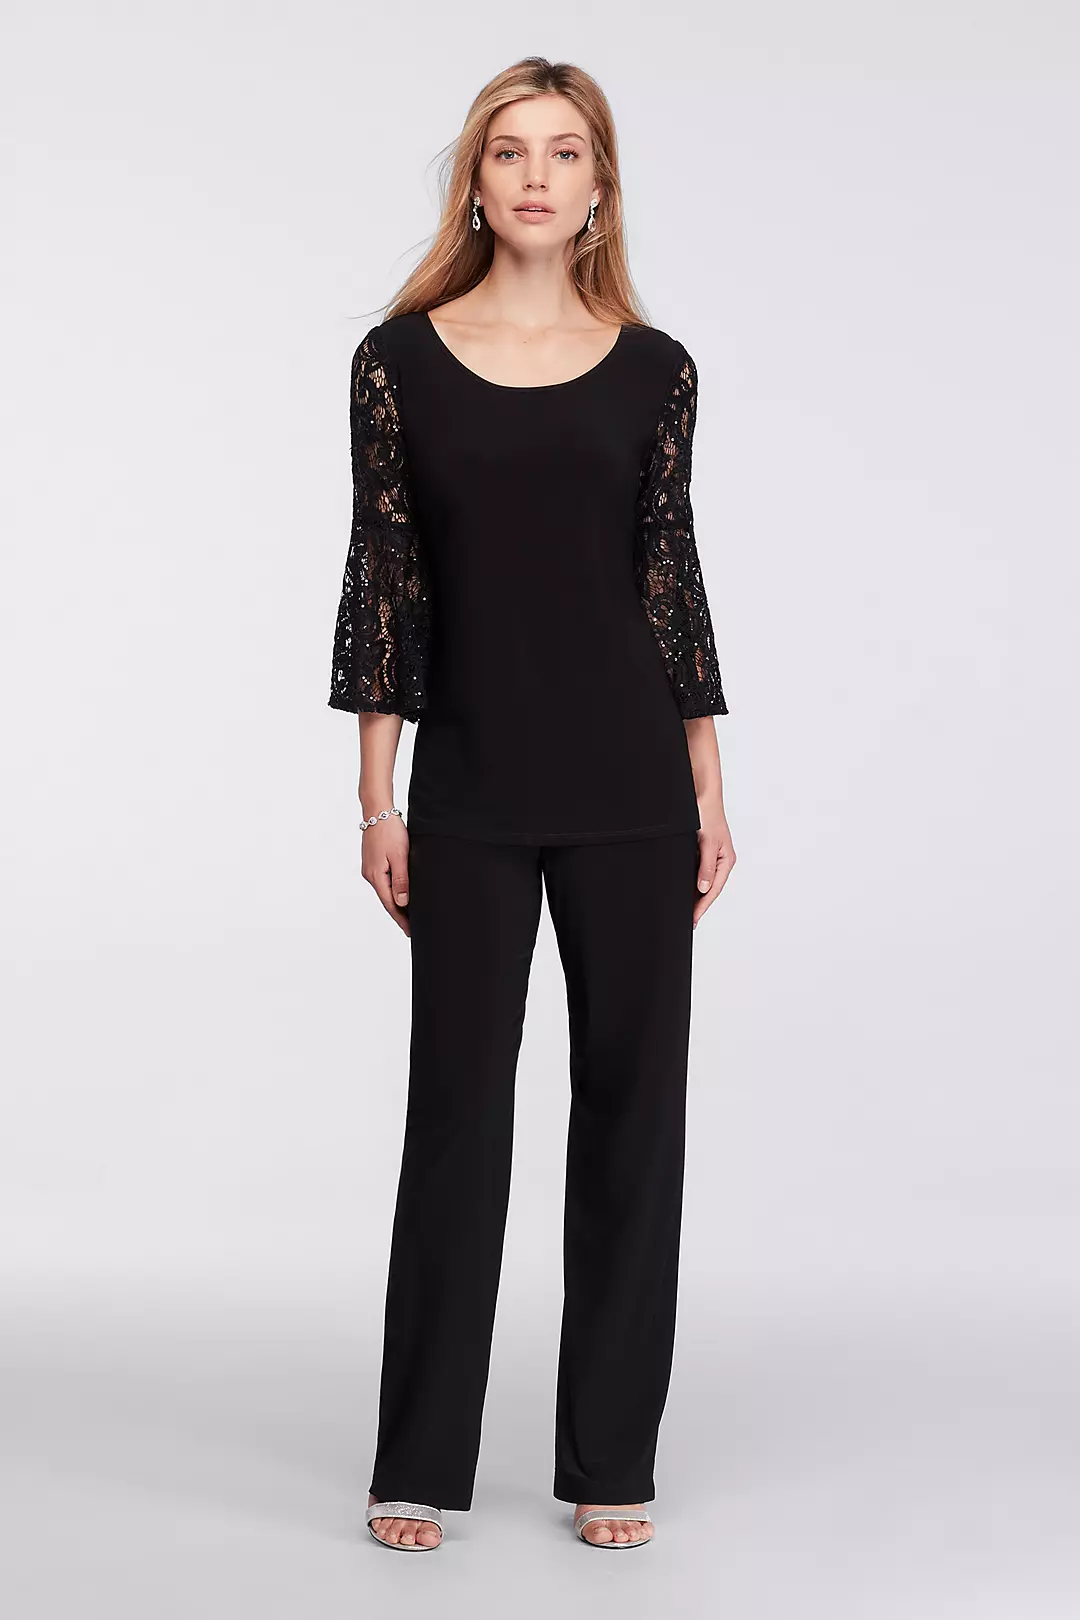 Jersey Two Piece Long Sleeve Pantsuit with Lace Image